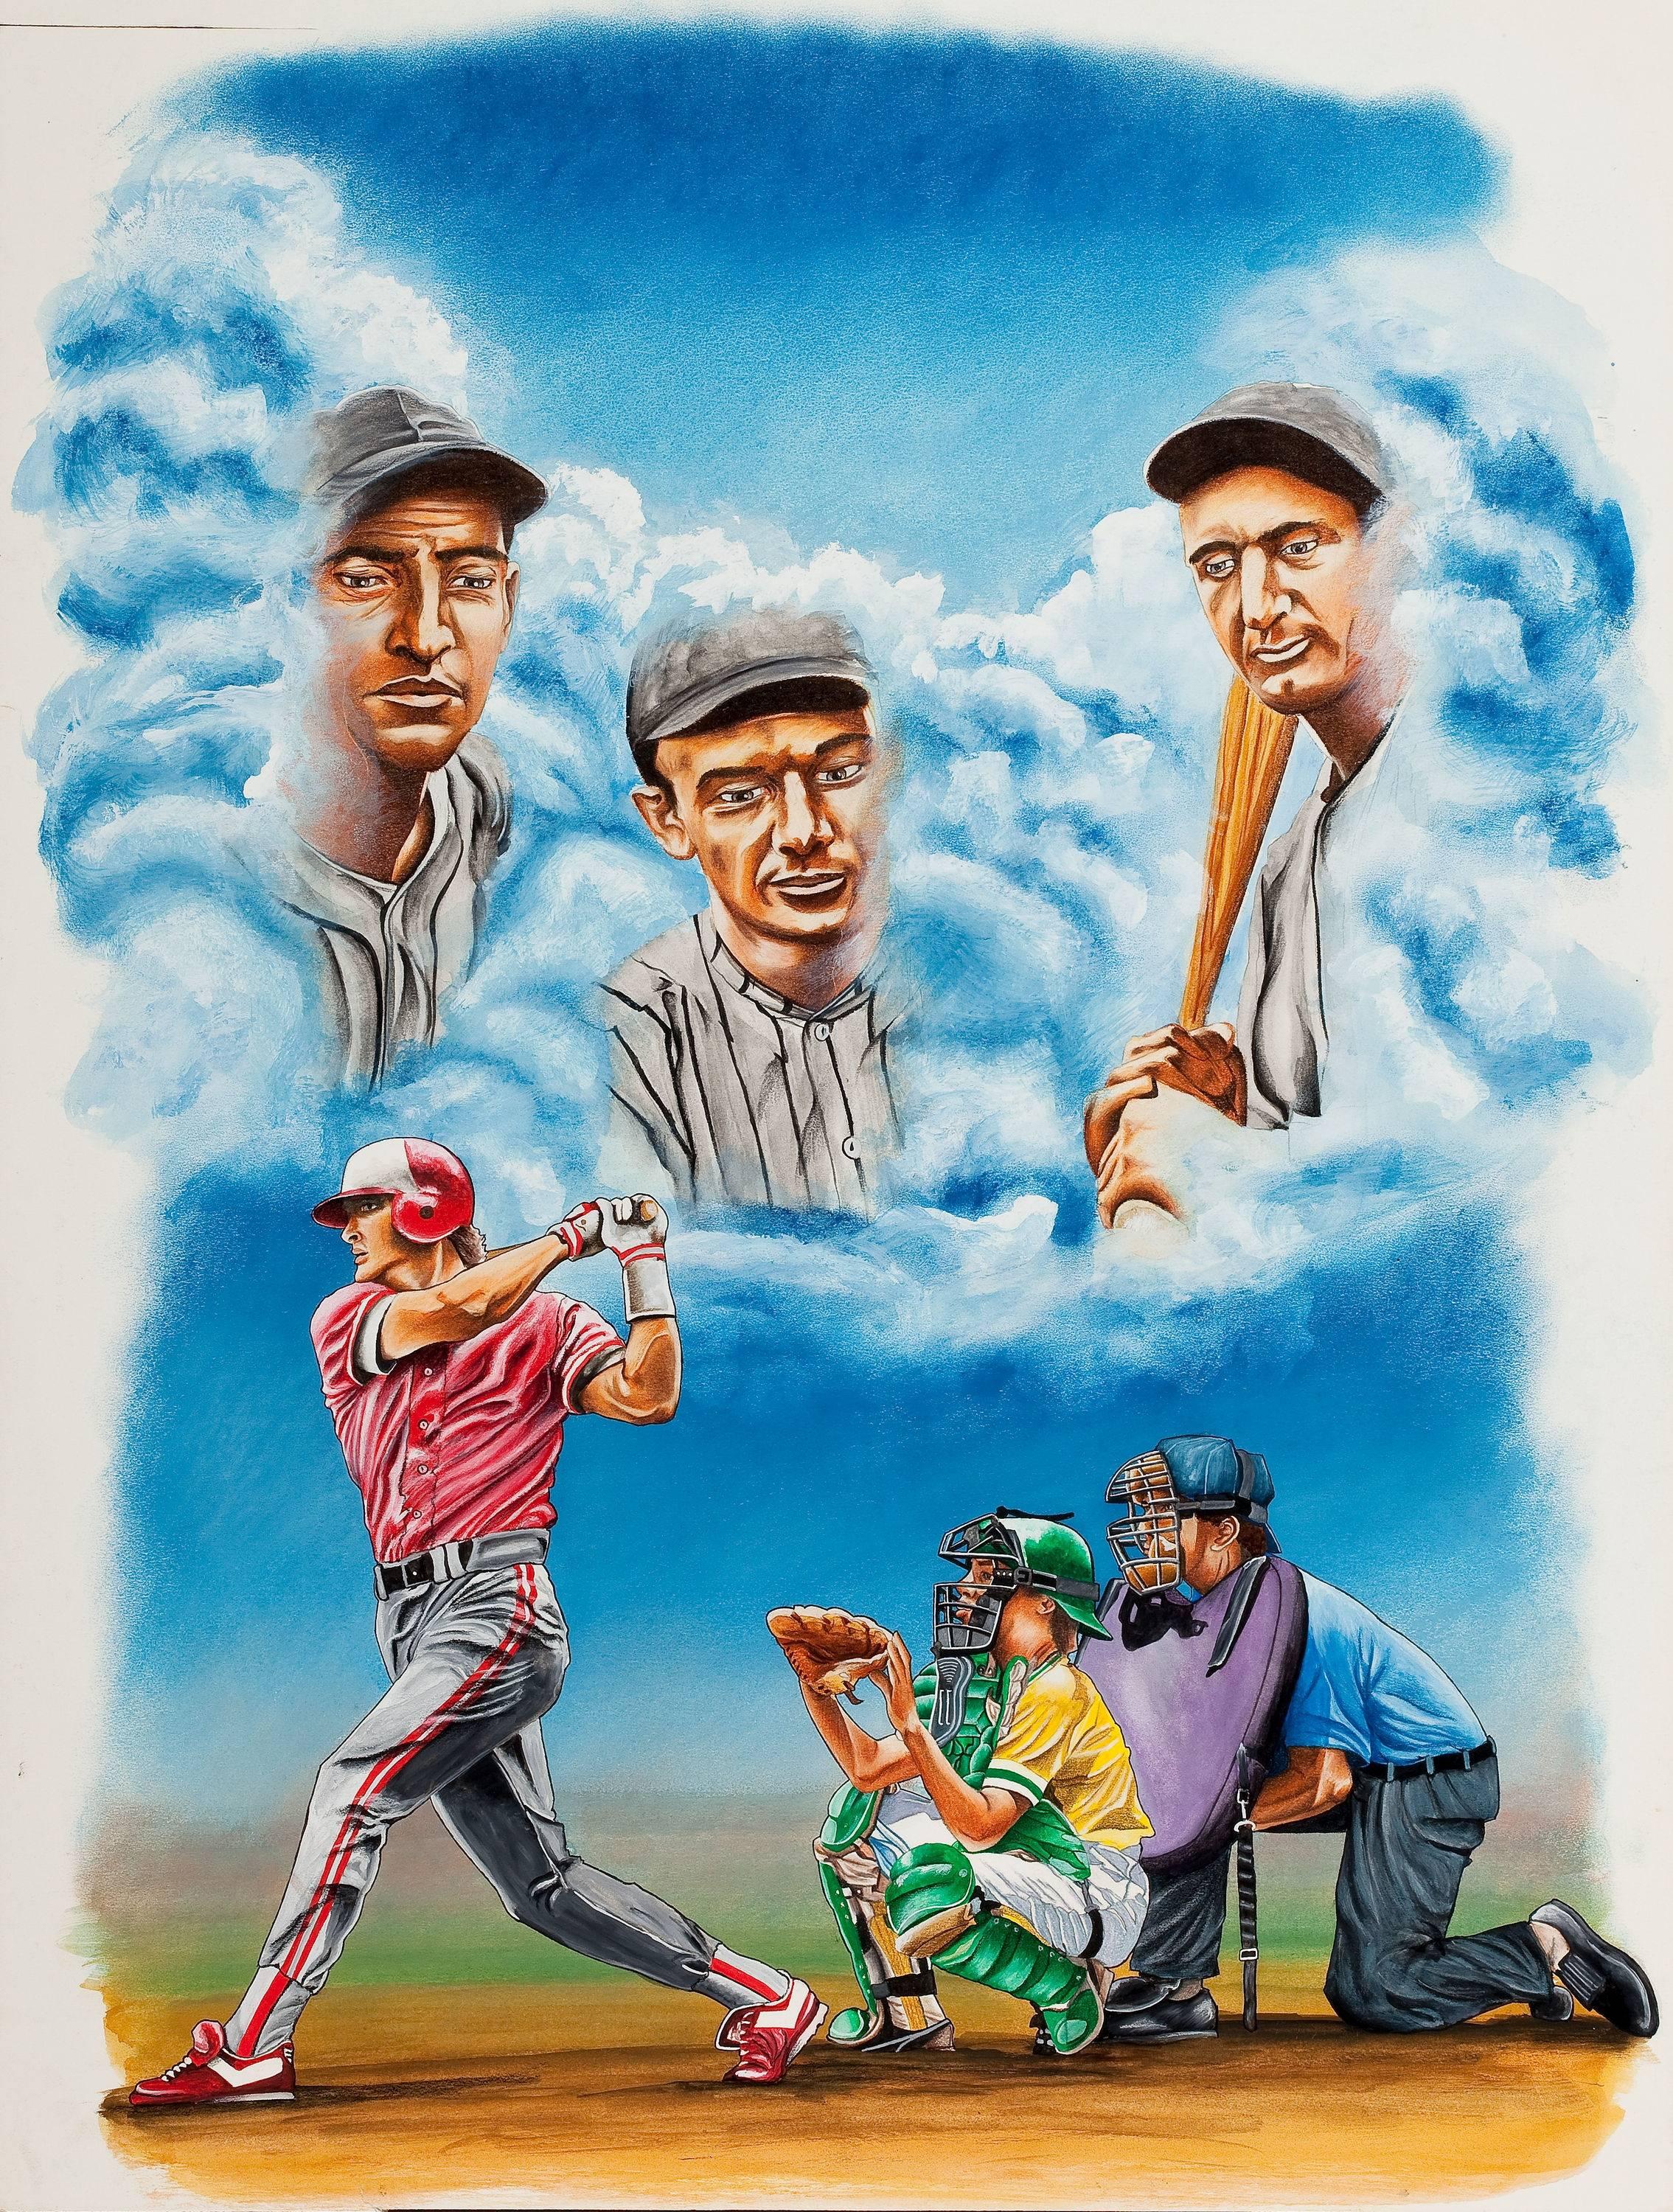 Medium: Watercolor, Gouache & Charcoal on Board
Date: 1950s
Dimensions: Various Sizes
Signature: Unsigned
Contact for exact dimensions. 

AMERICAN ARTIST (20th Century)
Group of four: baseball themed illustrations
